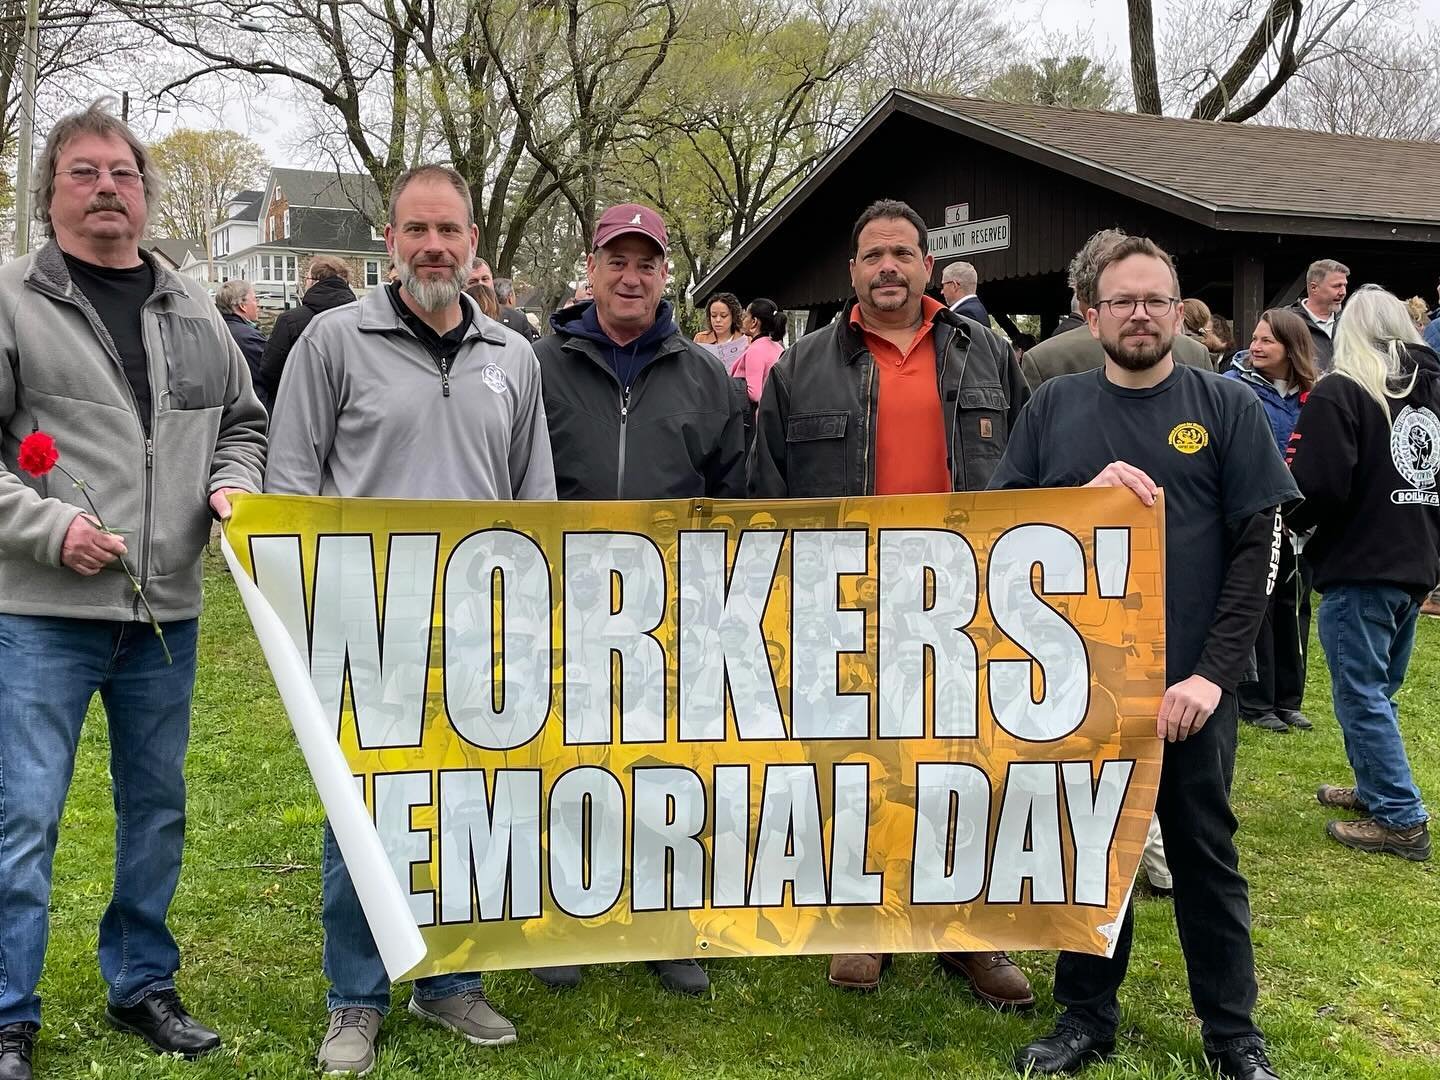 This past weekend, alongside the many change makers such as Senator Richard Blumenthal, Connecticut AFL-CIO President Ed Hawthorne, and Groton Mayor Keith Hedrick, our staff and members gathered at the Hartford City Capitol to honor Workers Memorial 